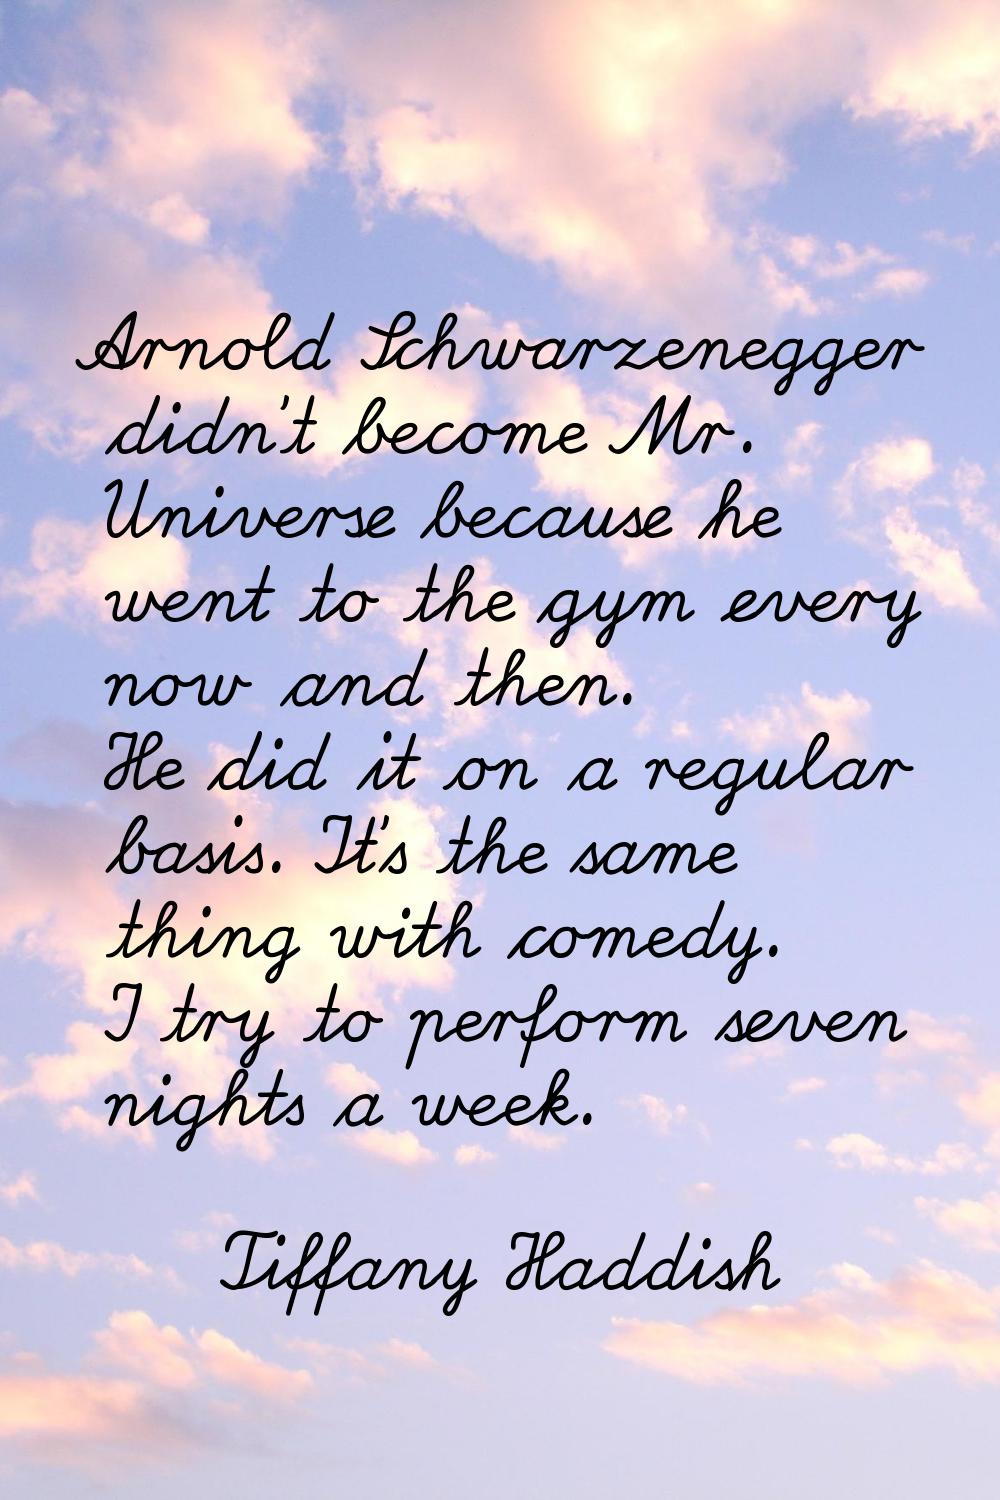 Arnold Schwarzenegger didn't become Mr. Universe because he went to the gym every now and then. He 